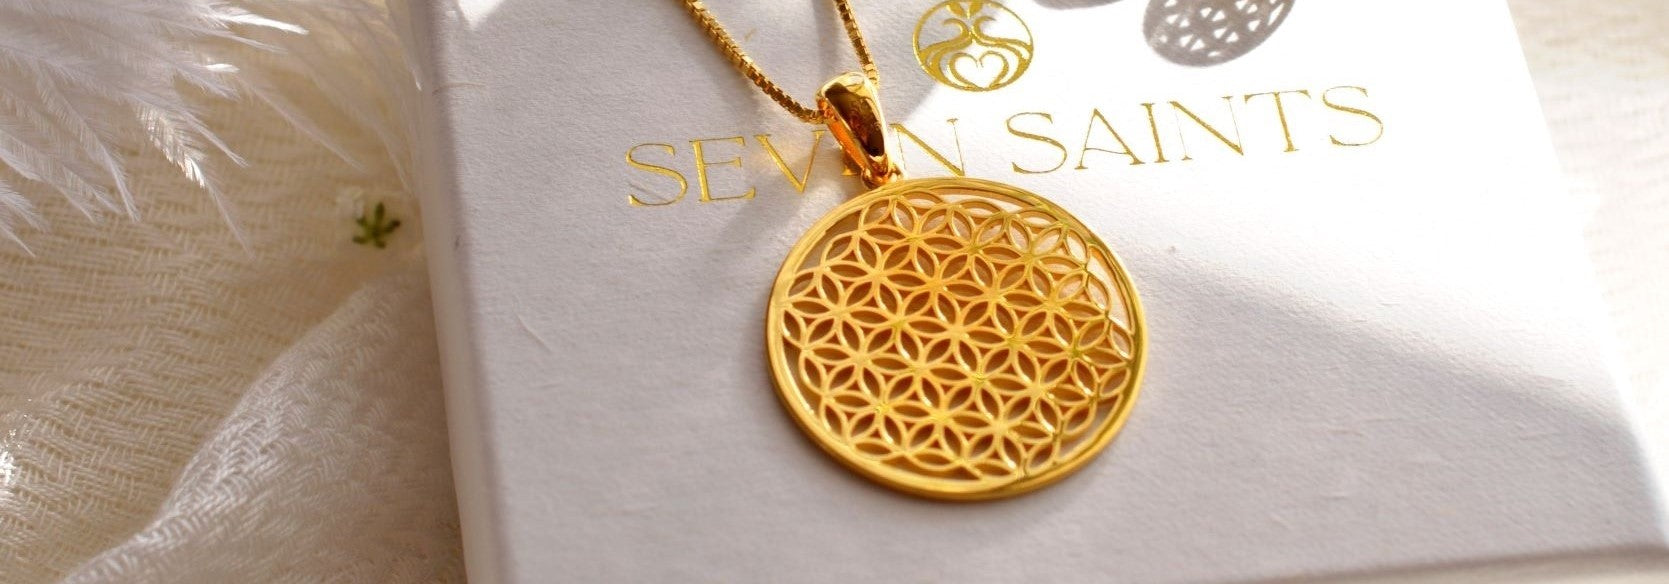 The Healing Powers of the Flower of Life